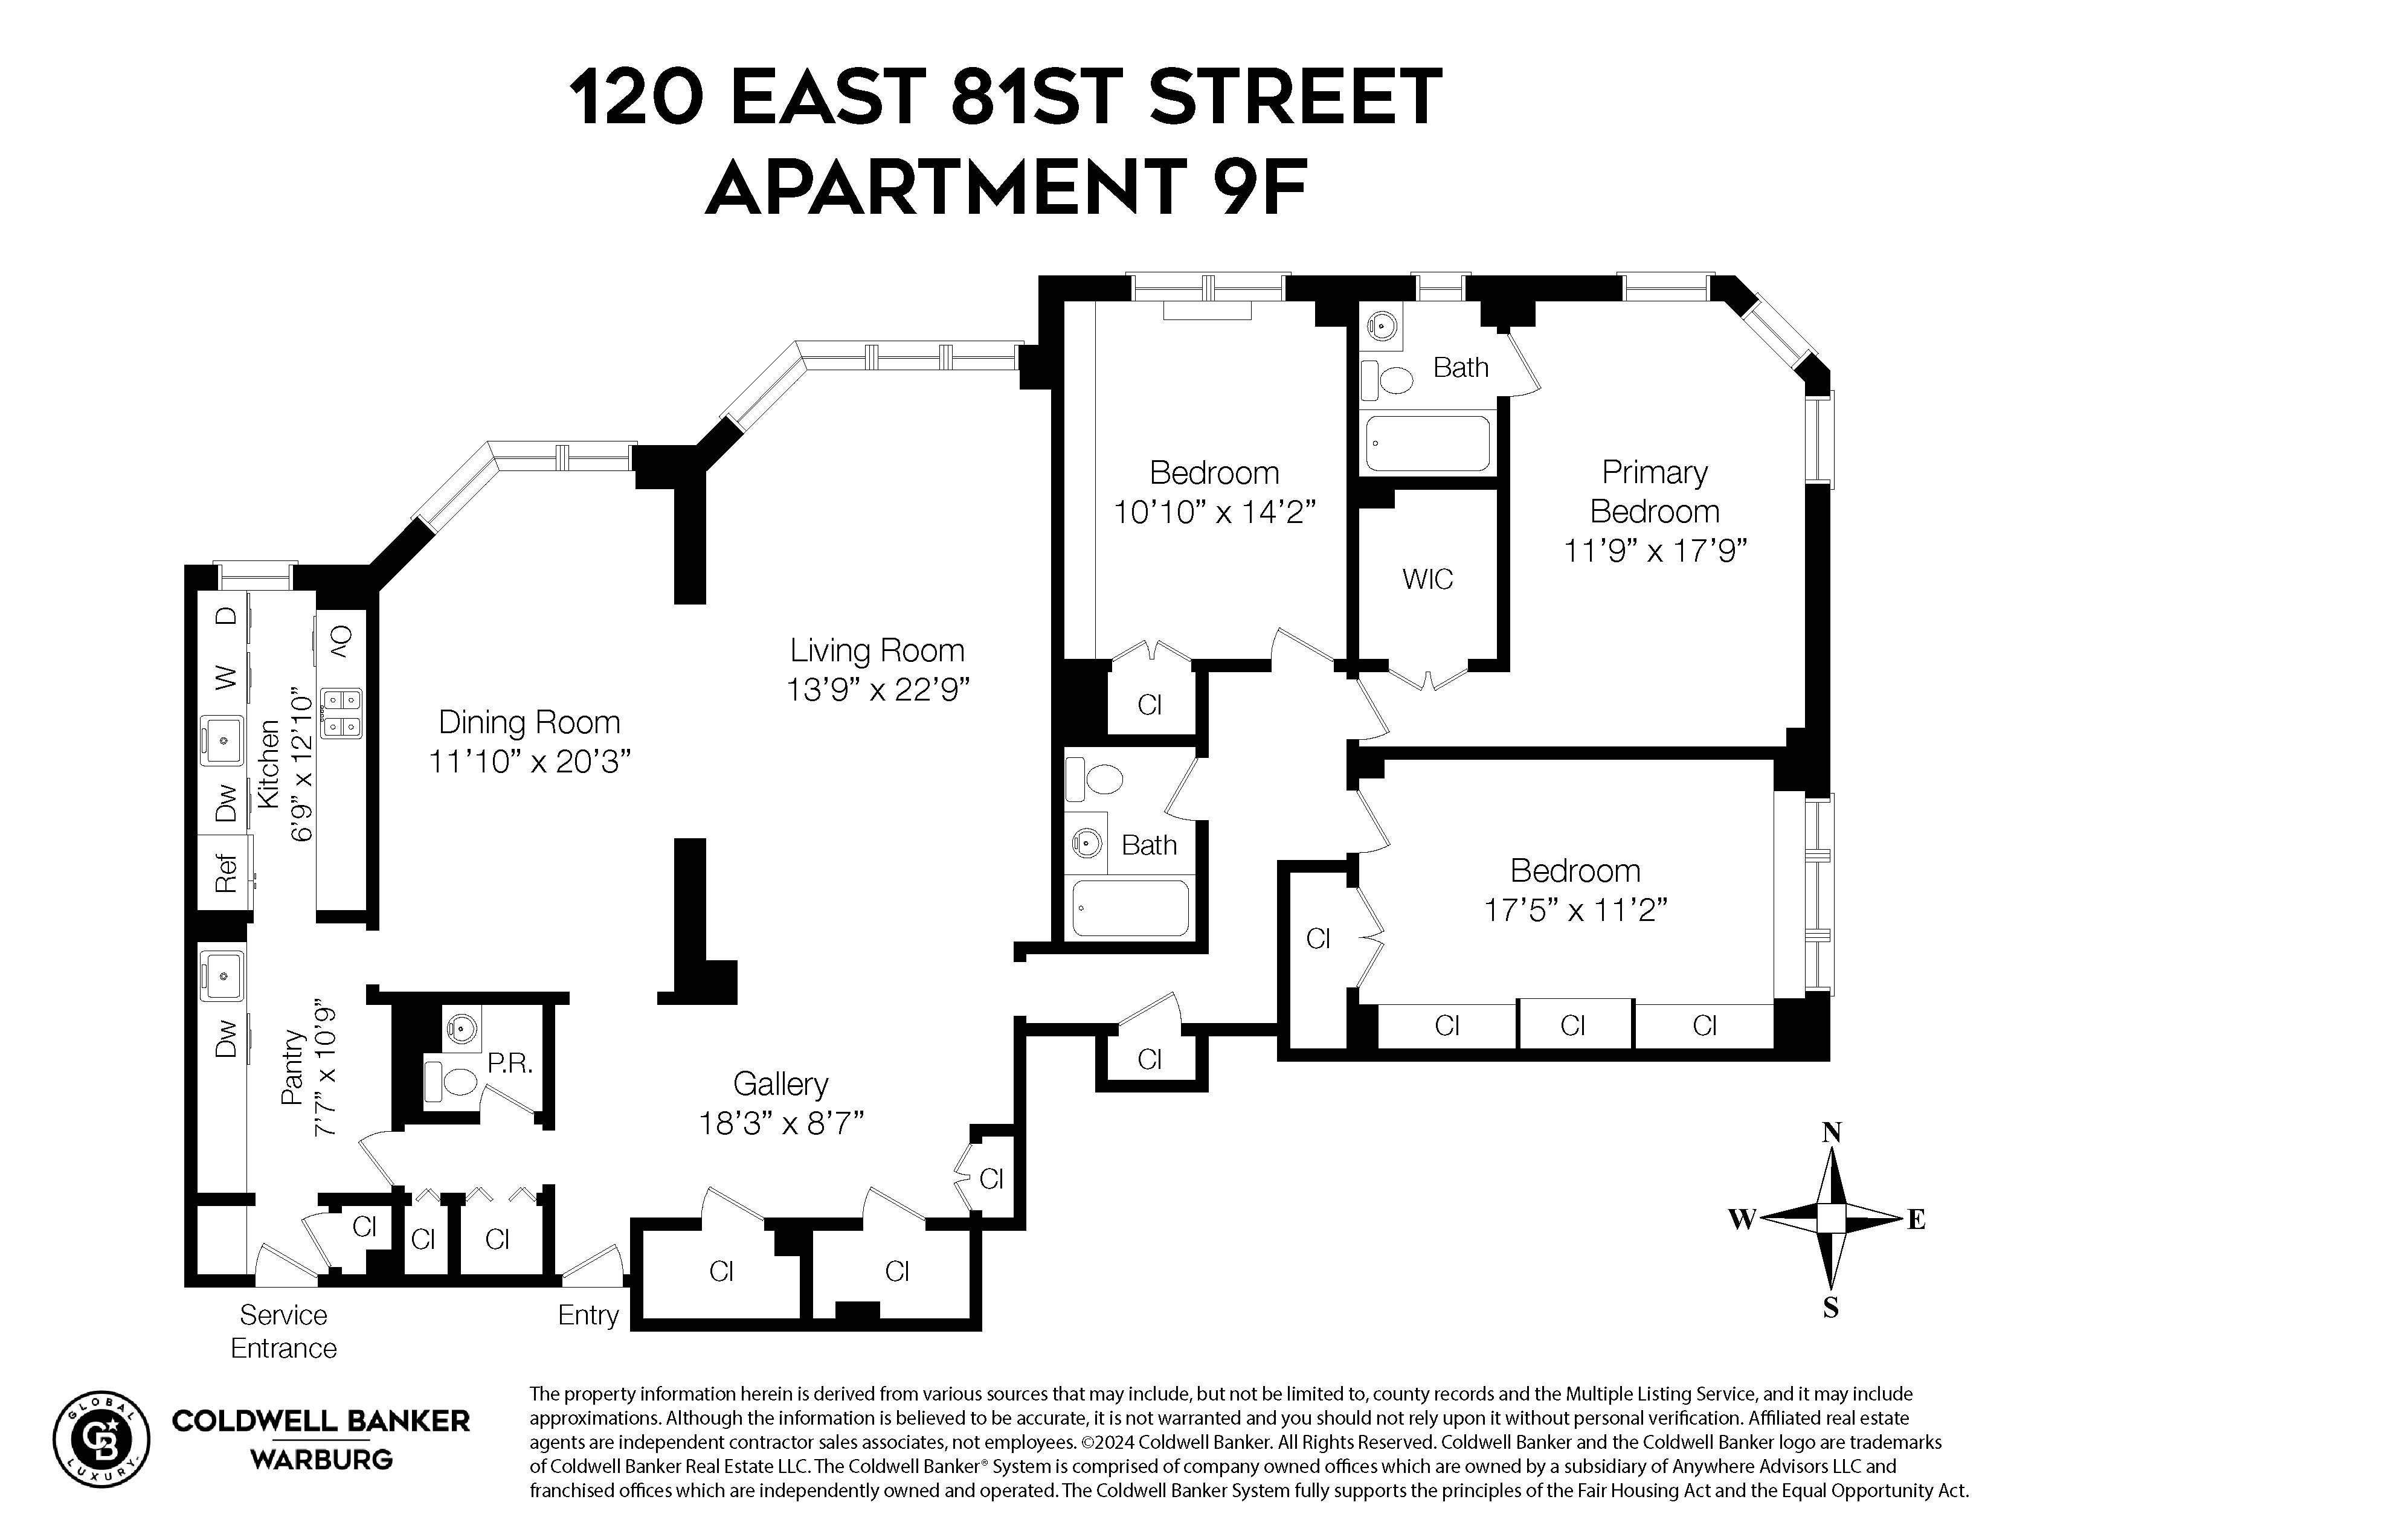 120 E 81st Street Unit 9F, New York, New York, 10075, United States, 3 Bedrooms Bedrooms, ,3 BathroomsBathrooms,Residential,For Sale,120 E 81st Street Unit 9F,1474124